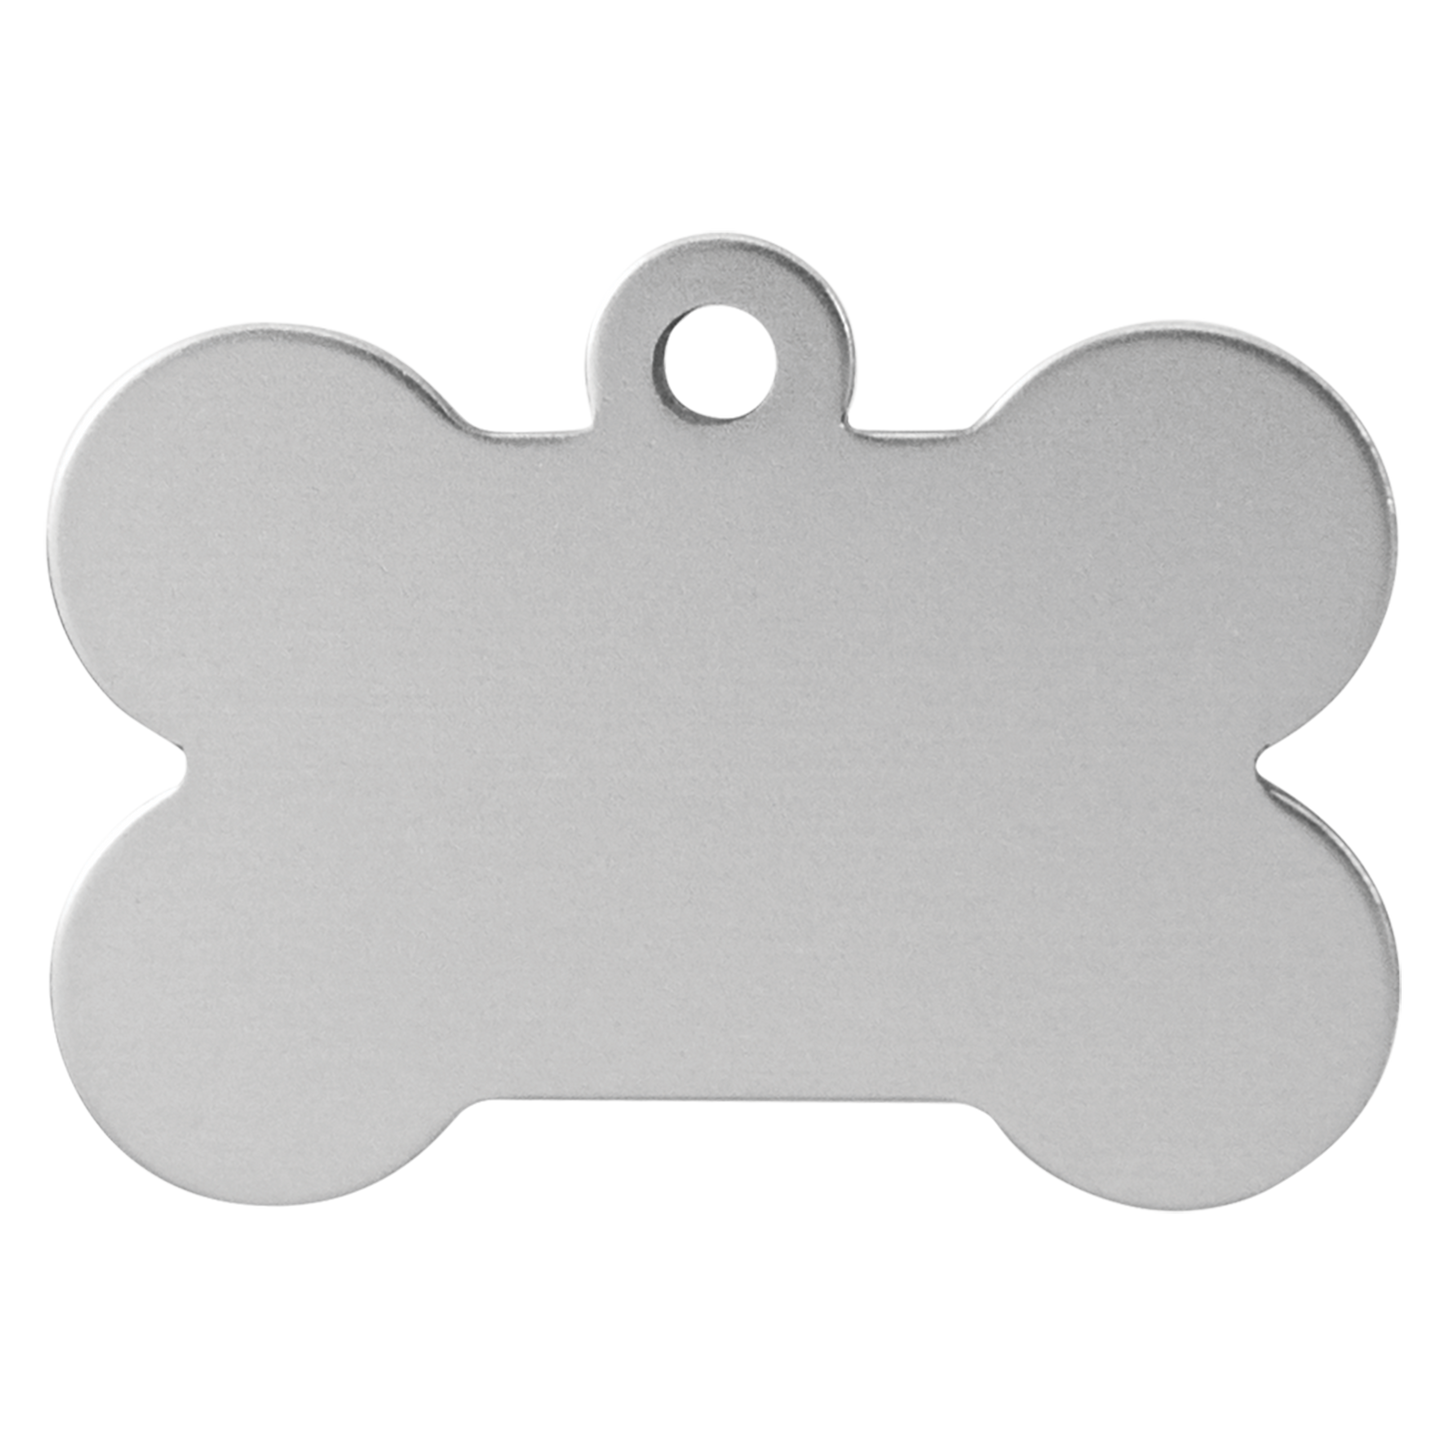 Engraved Pet ID Tags